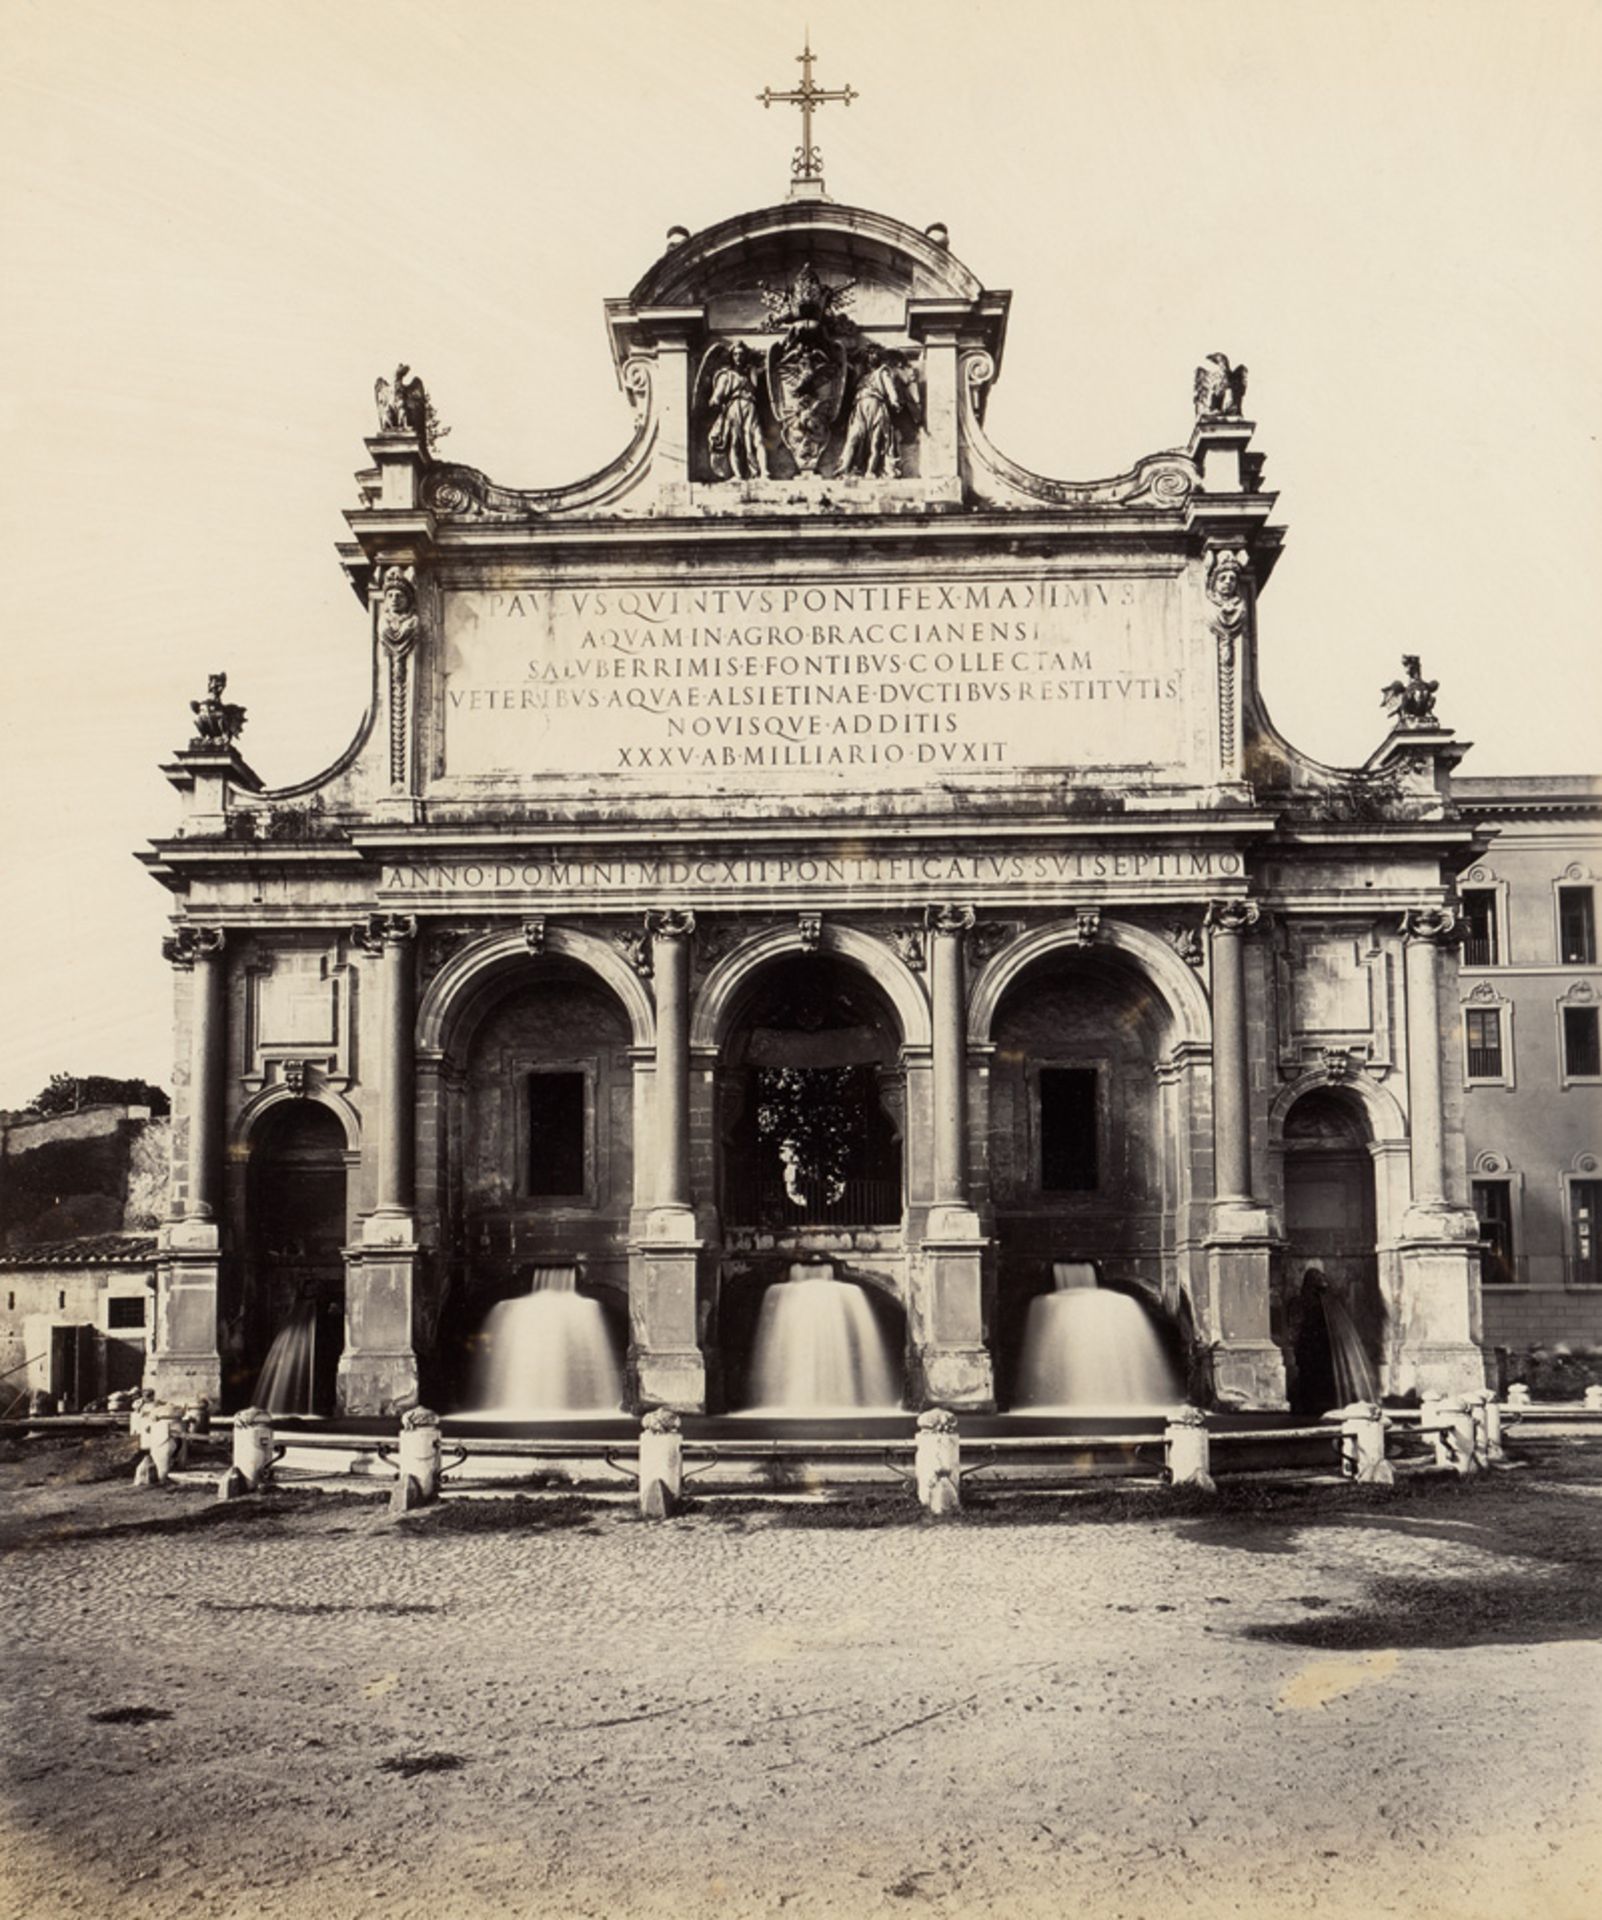 Anderson, James and Unknown: Views of Rome